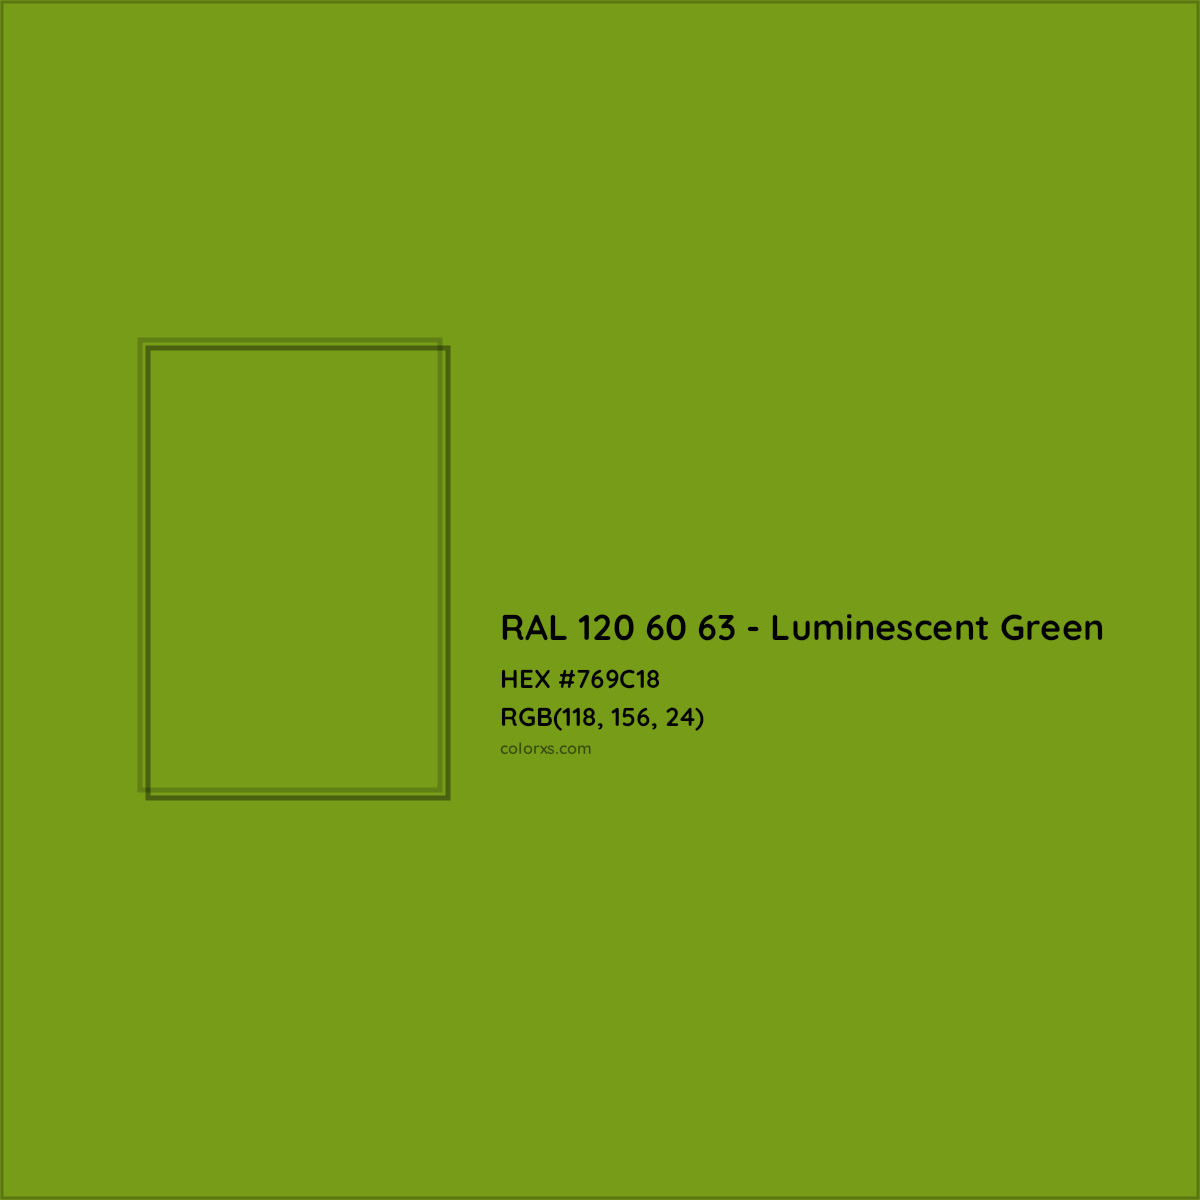 HEX #769C18 RAL 120 60 63 - Luminescent Green CMS RAL Design - Color Code